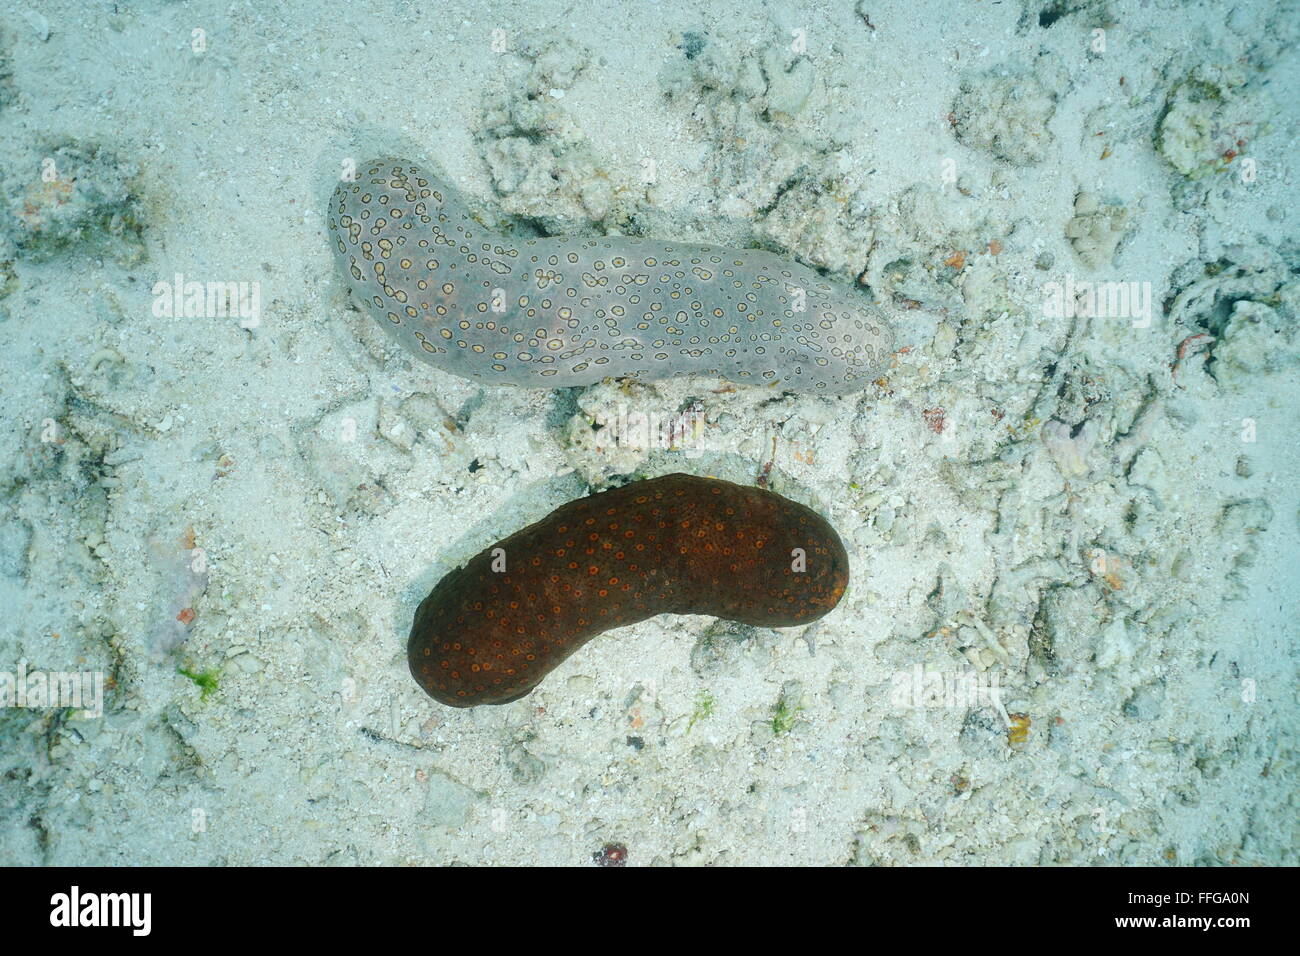 Underwater marine life, two leopard sea cucumber, Bohadschia argus, with different colors, Pacific ocean, French polynesia Stock Photo